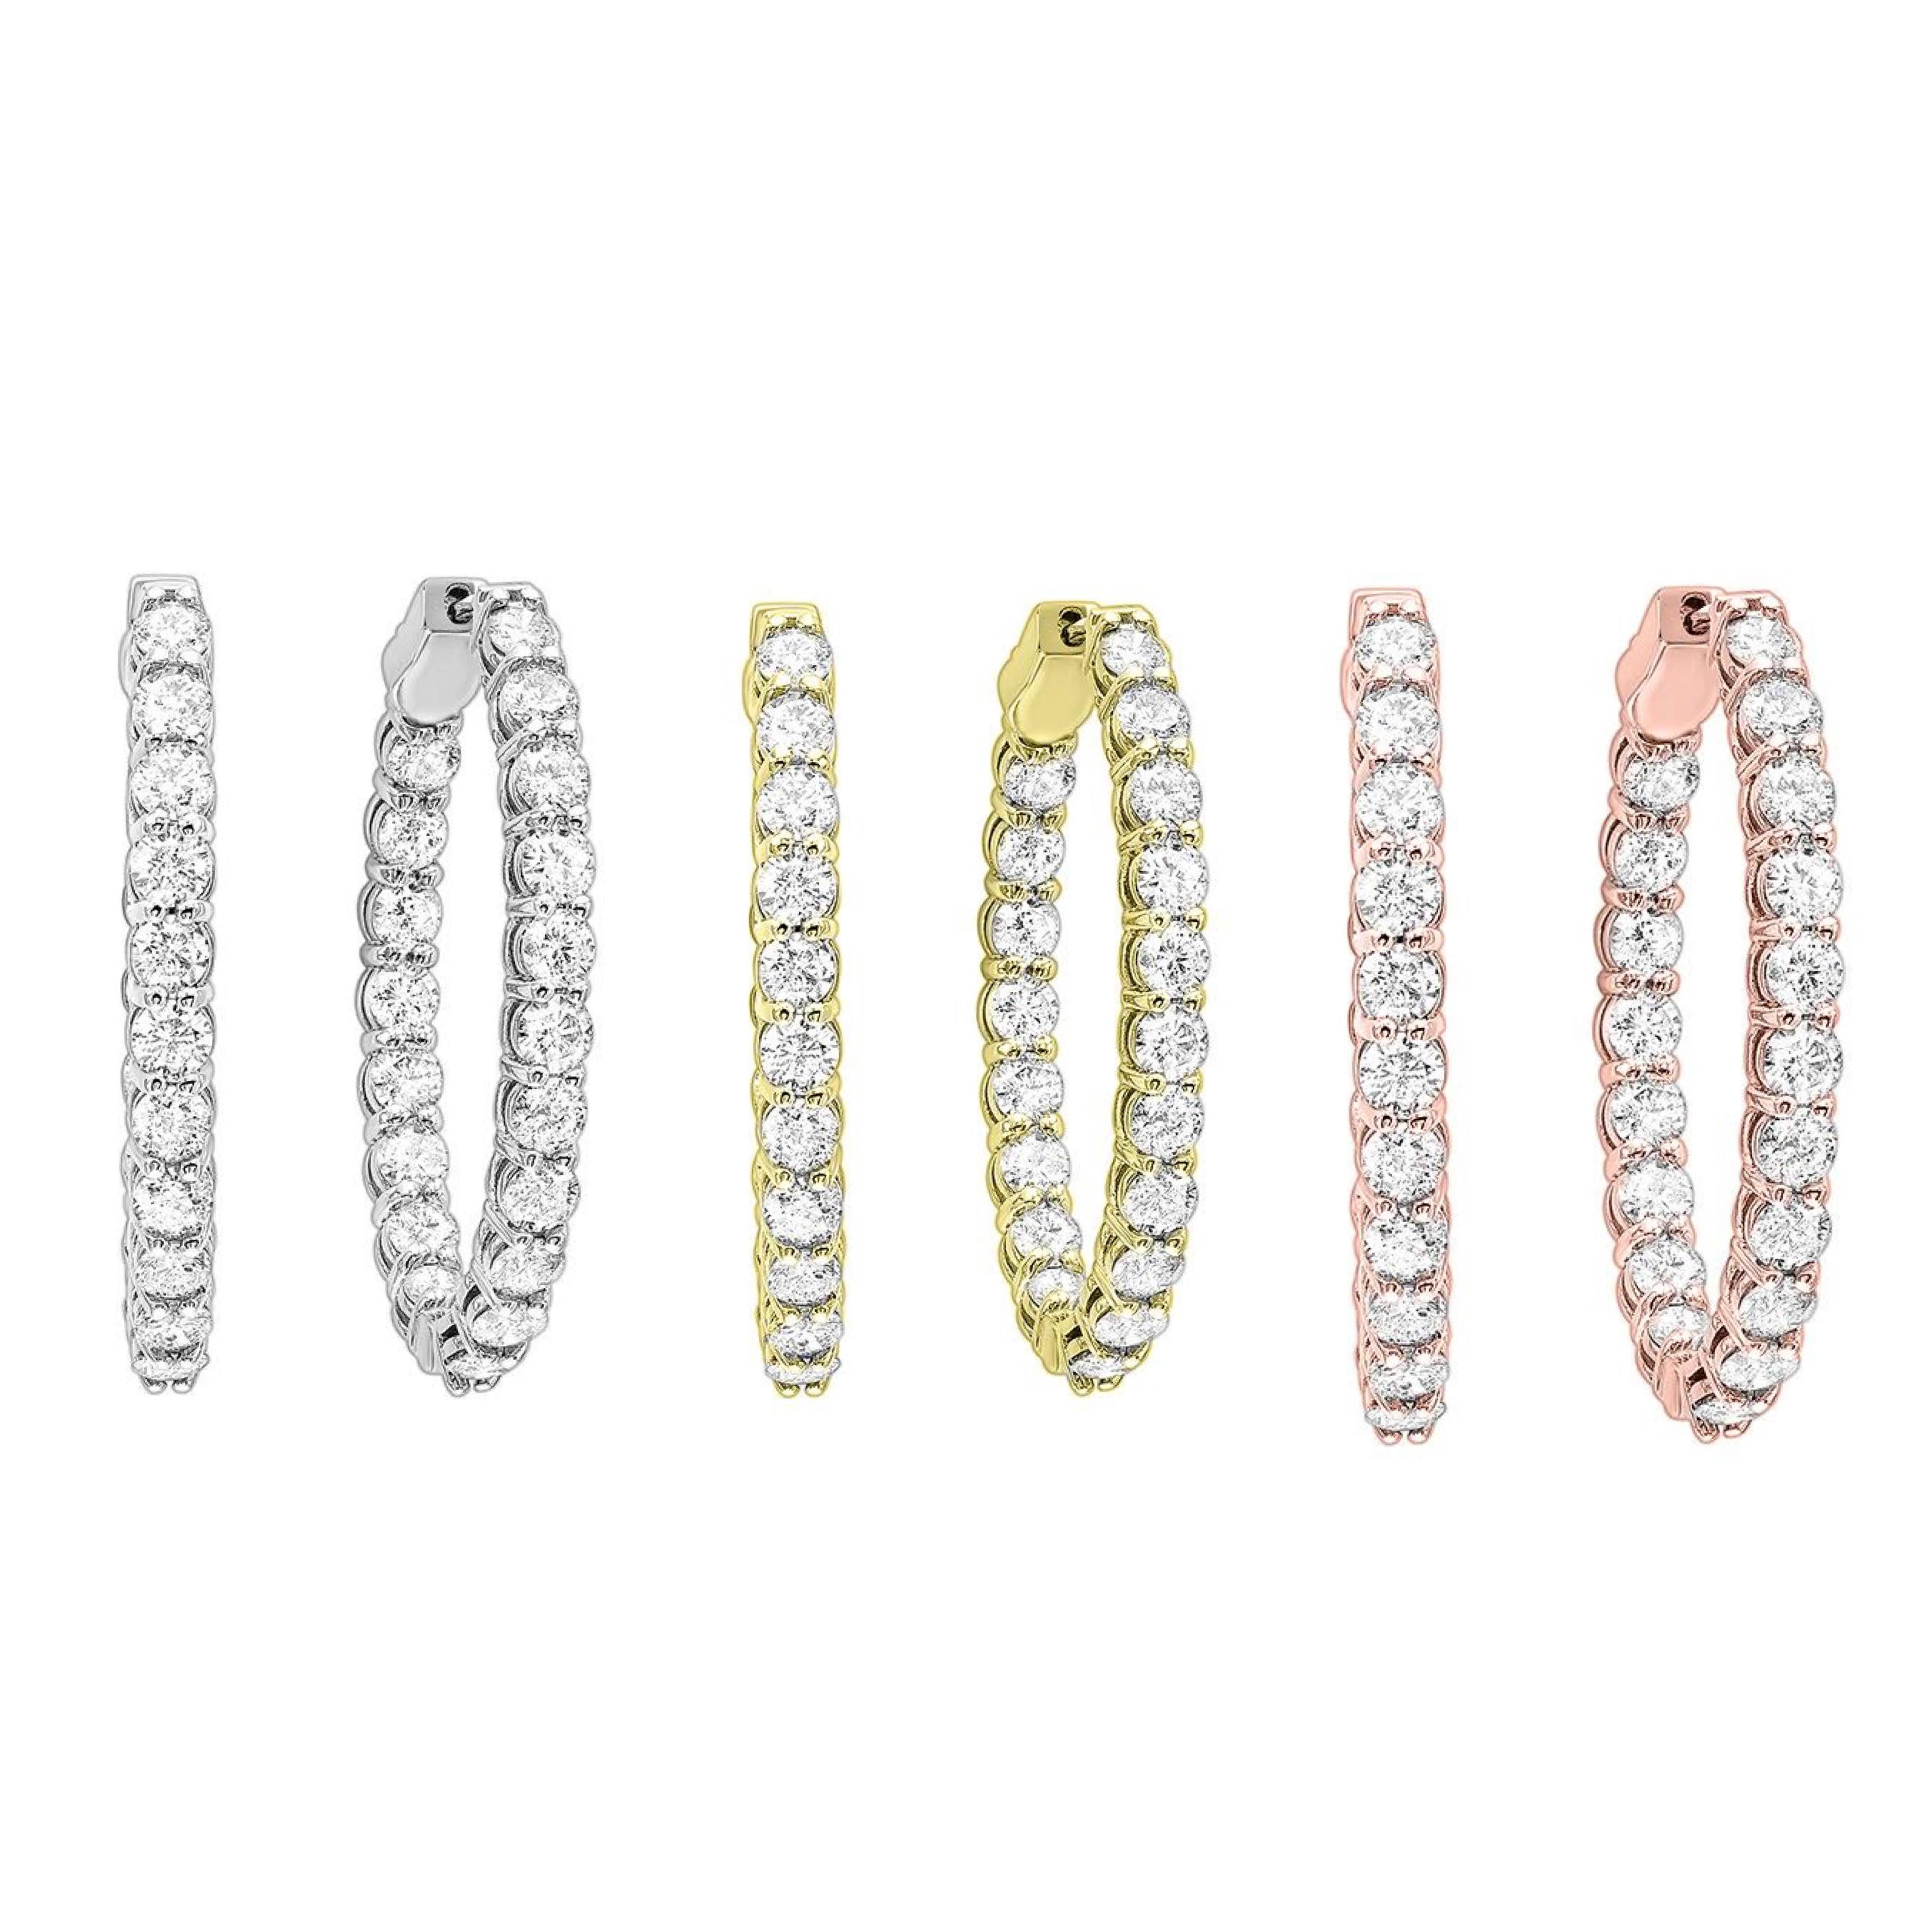 Nothing says luxury like an incredible pair of diamond hoop earrings. These stunning brightly polished 14 karat yellow gold inside out oval-shaped hoop earrings feature a total of 40 round brilliant cut diamonds totaling 1.00 carats are prong set on